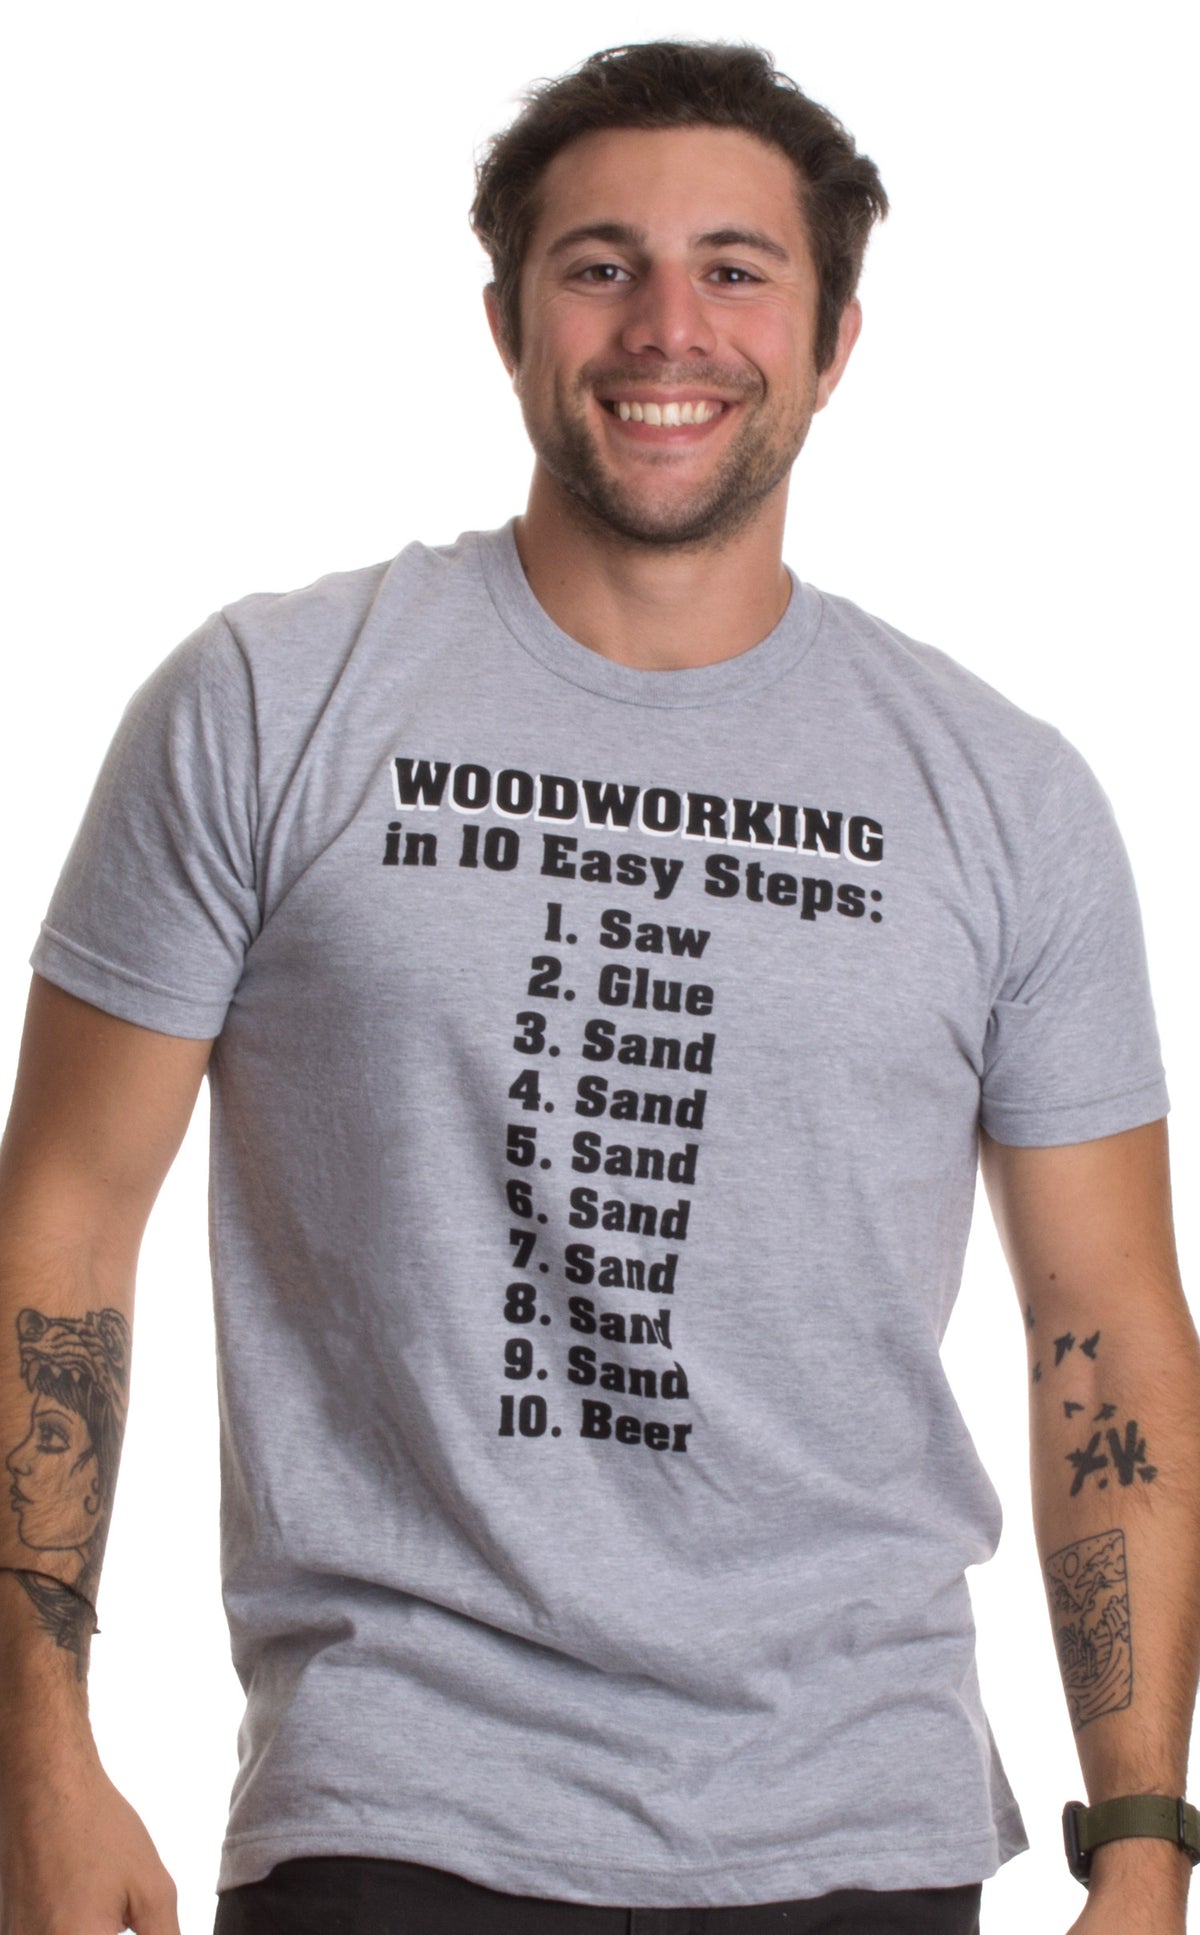 10 Easy Steps of Woodworking | Funny Wood Working Worker Tool Saw Humor T-shirt